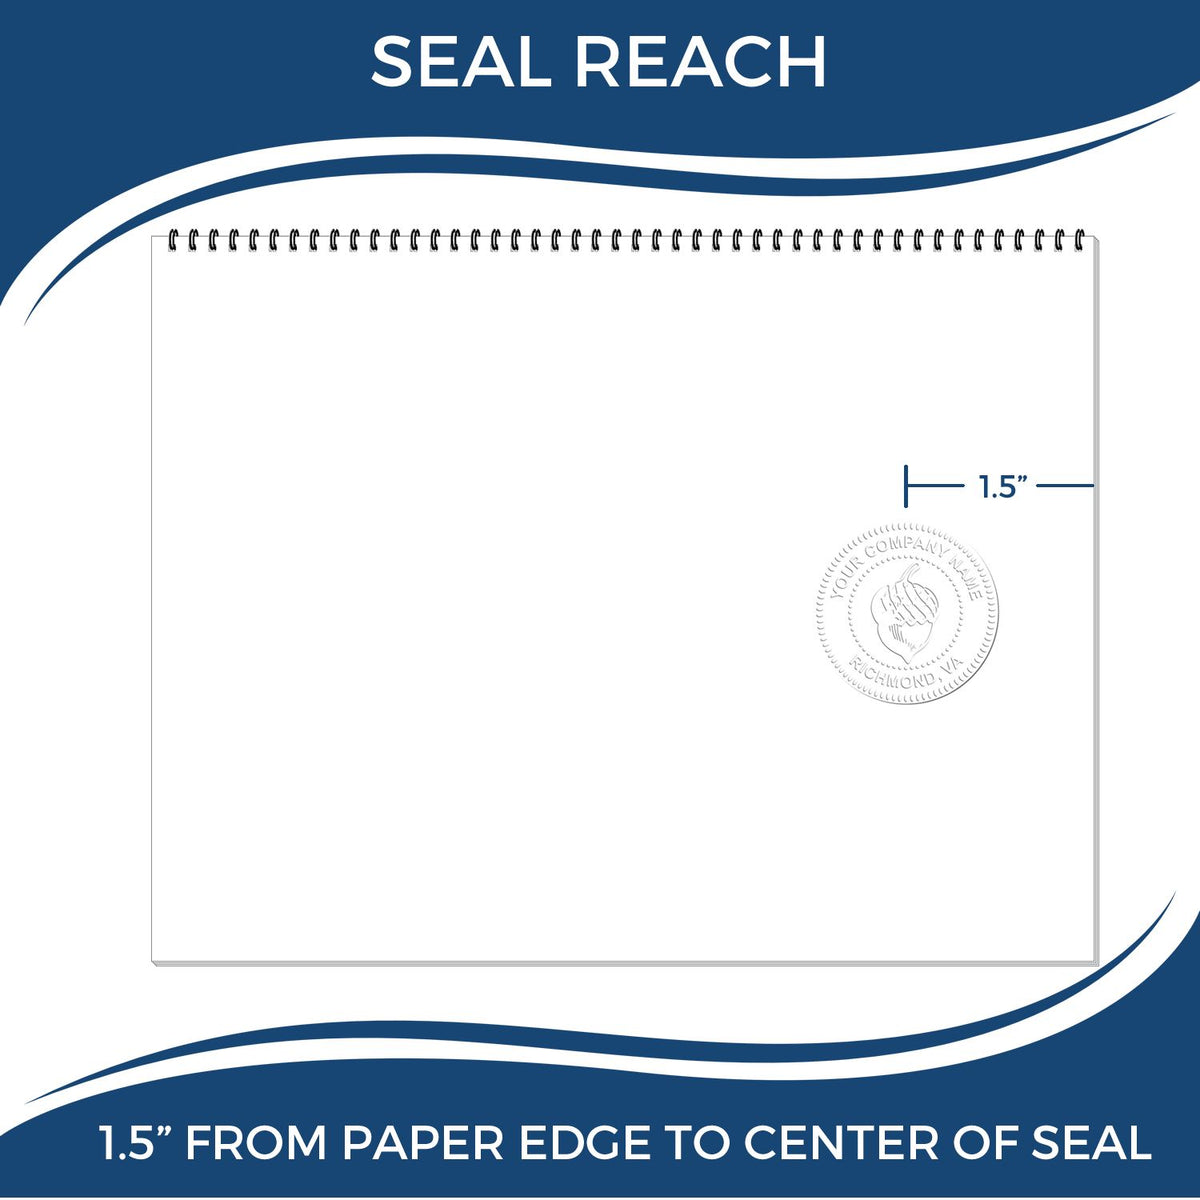 An infographic showing the seal reach which is represented by a ruler and a miniature seal image of the Soft Vermont Professional Engineer Seal